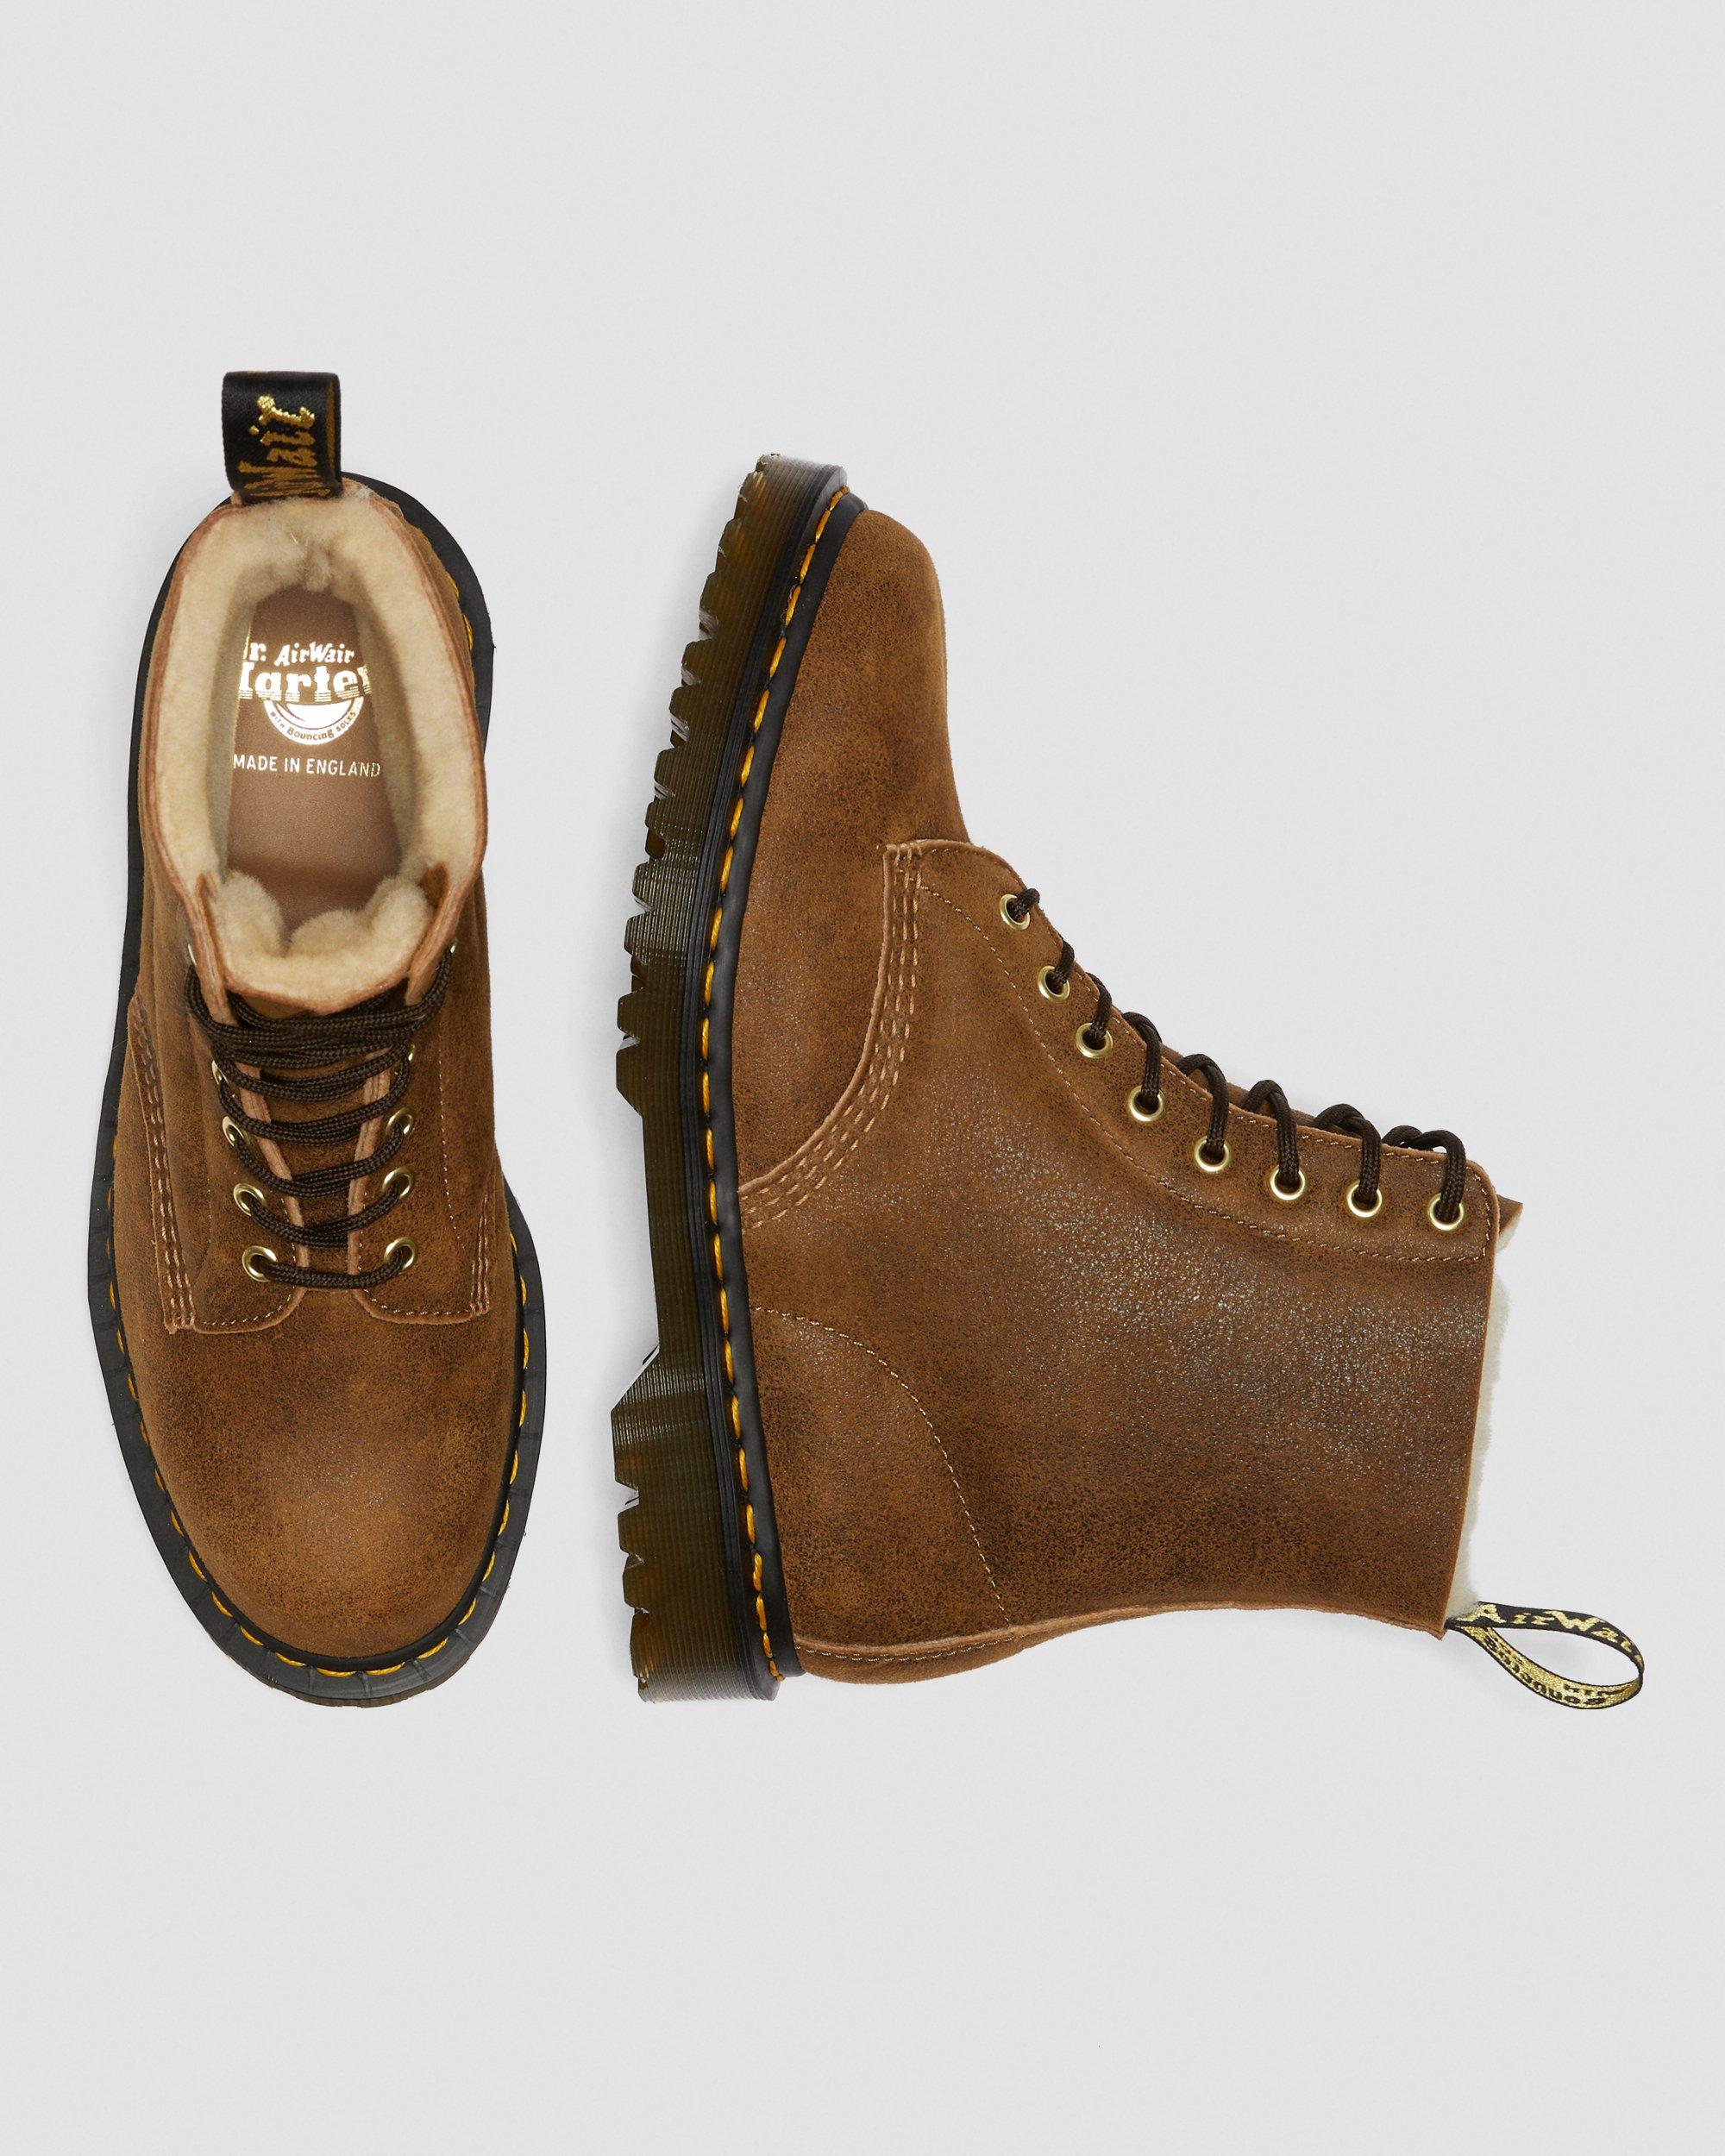 dr martens wool lined boots